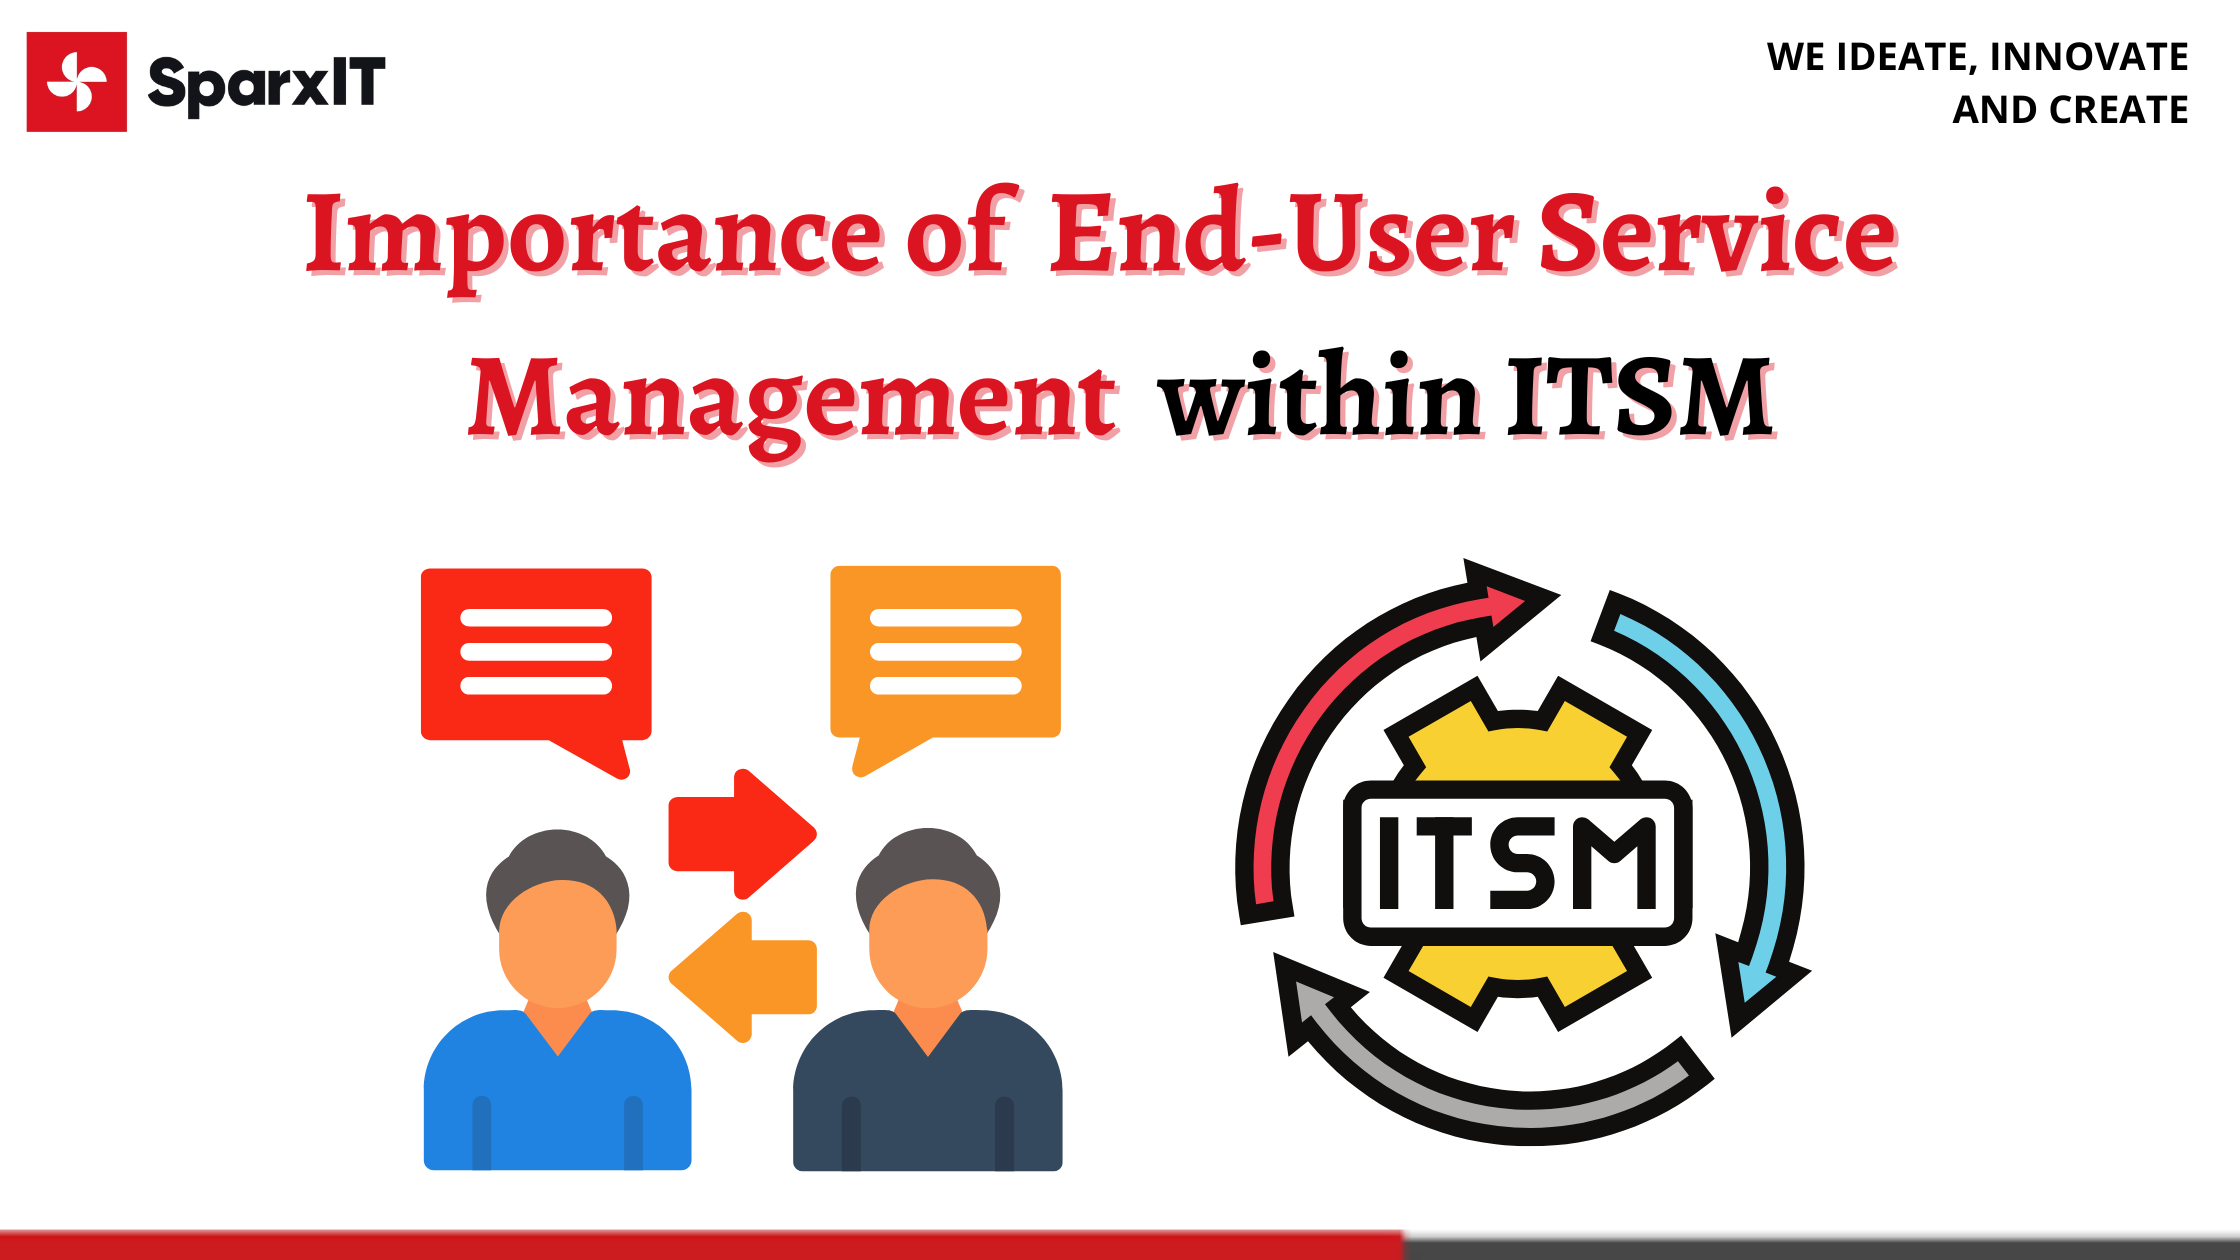 Importance of End-User Service Management within ITSM